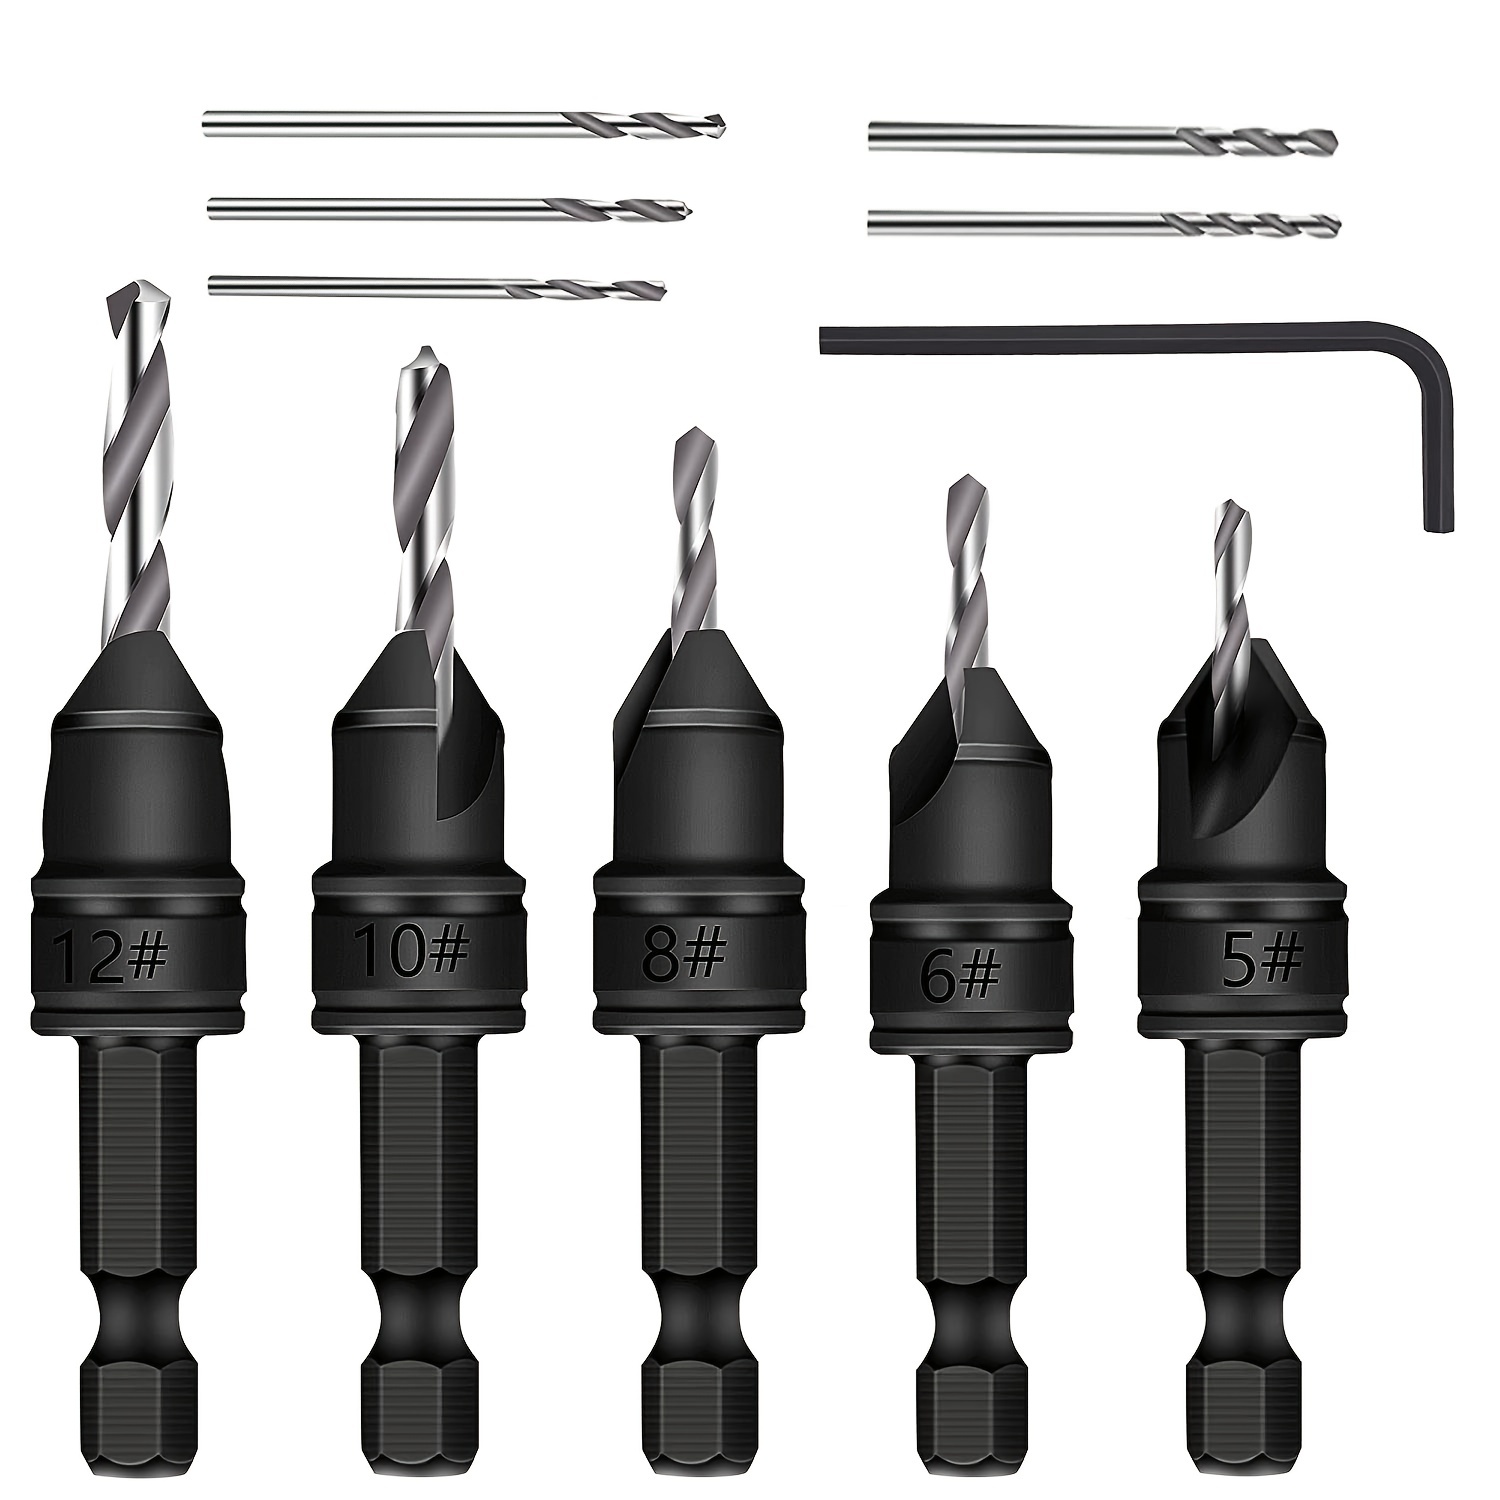 

1 Set, Countersink Drill Bit Set, 5pcs Free Replaceable Hss Drill Bits For Wood Quick-change Chamfered Adjustable Drilling Tool Kit On Pilot Counter Sink Holes For Woodworking